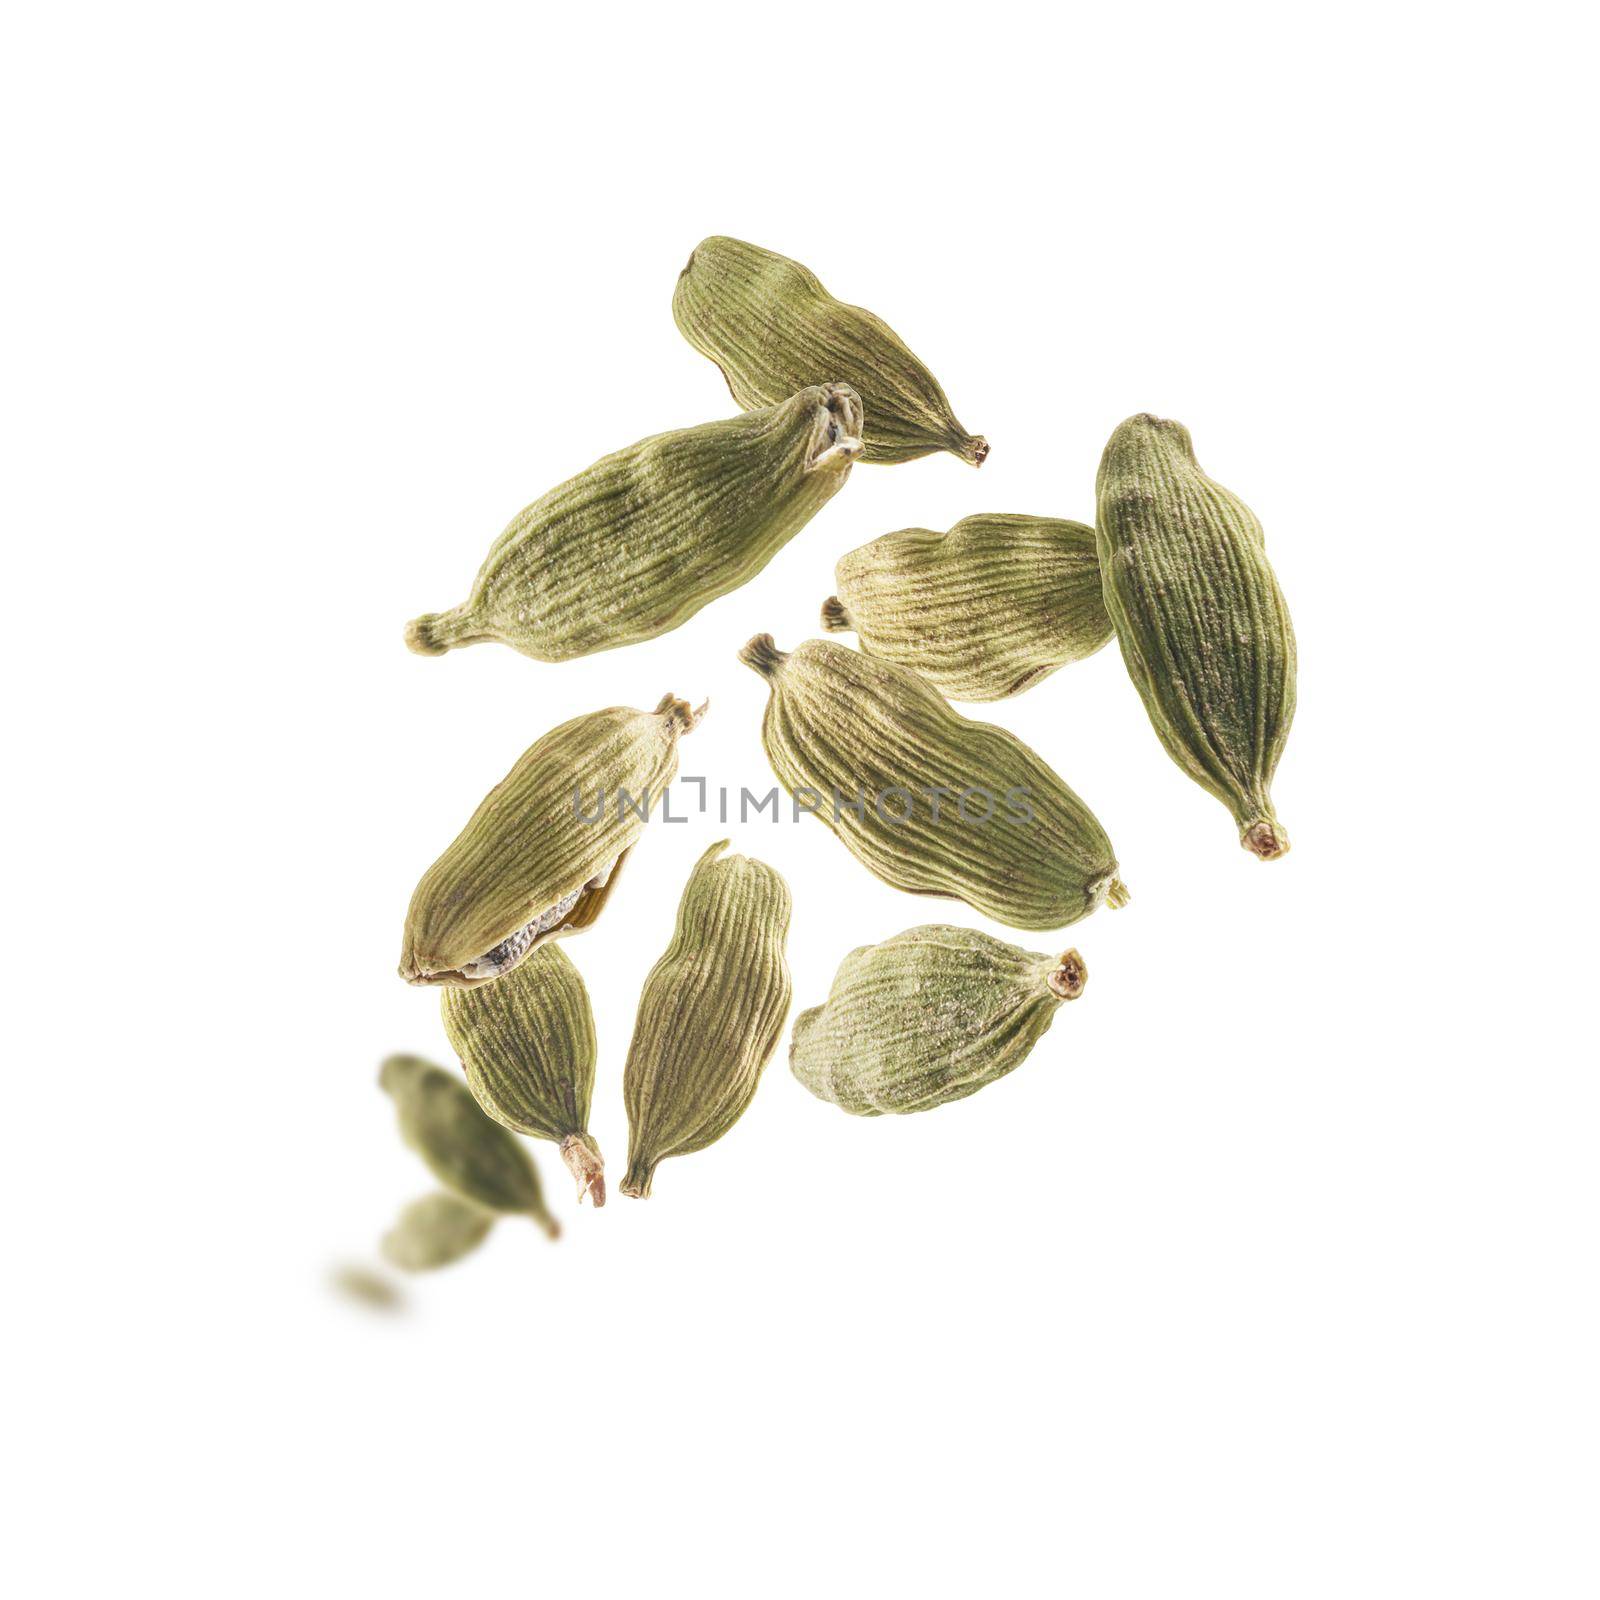 Cardamom pods levitate on a white background.